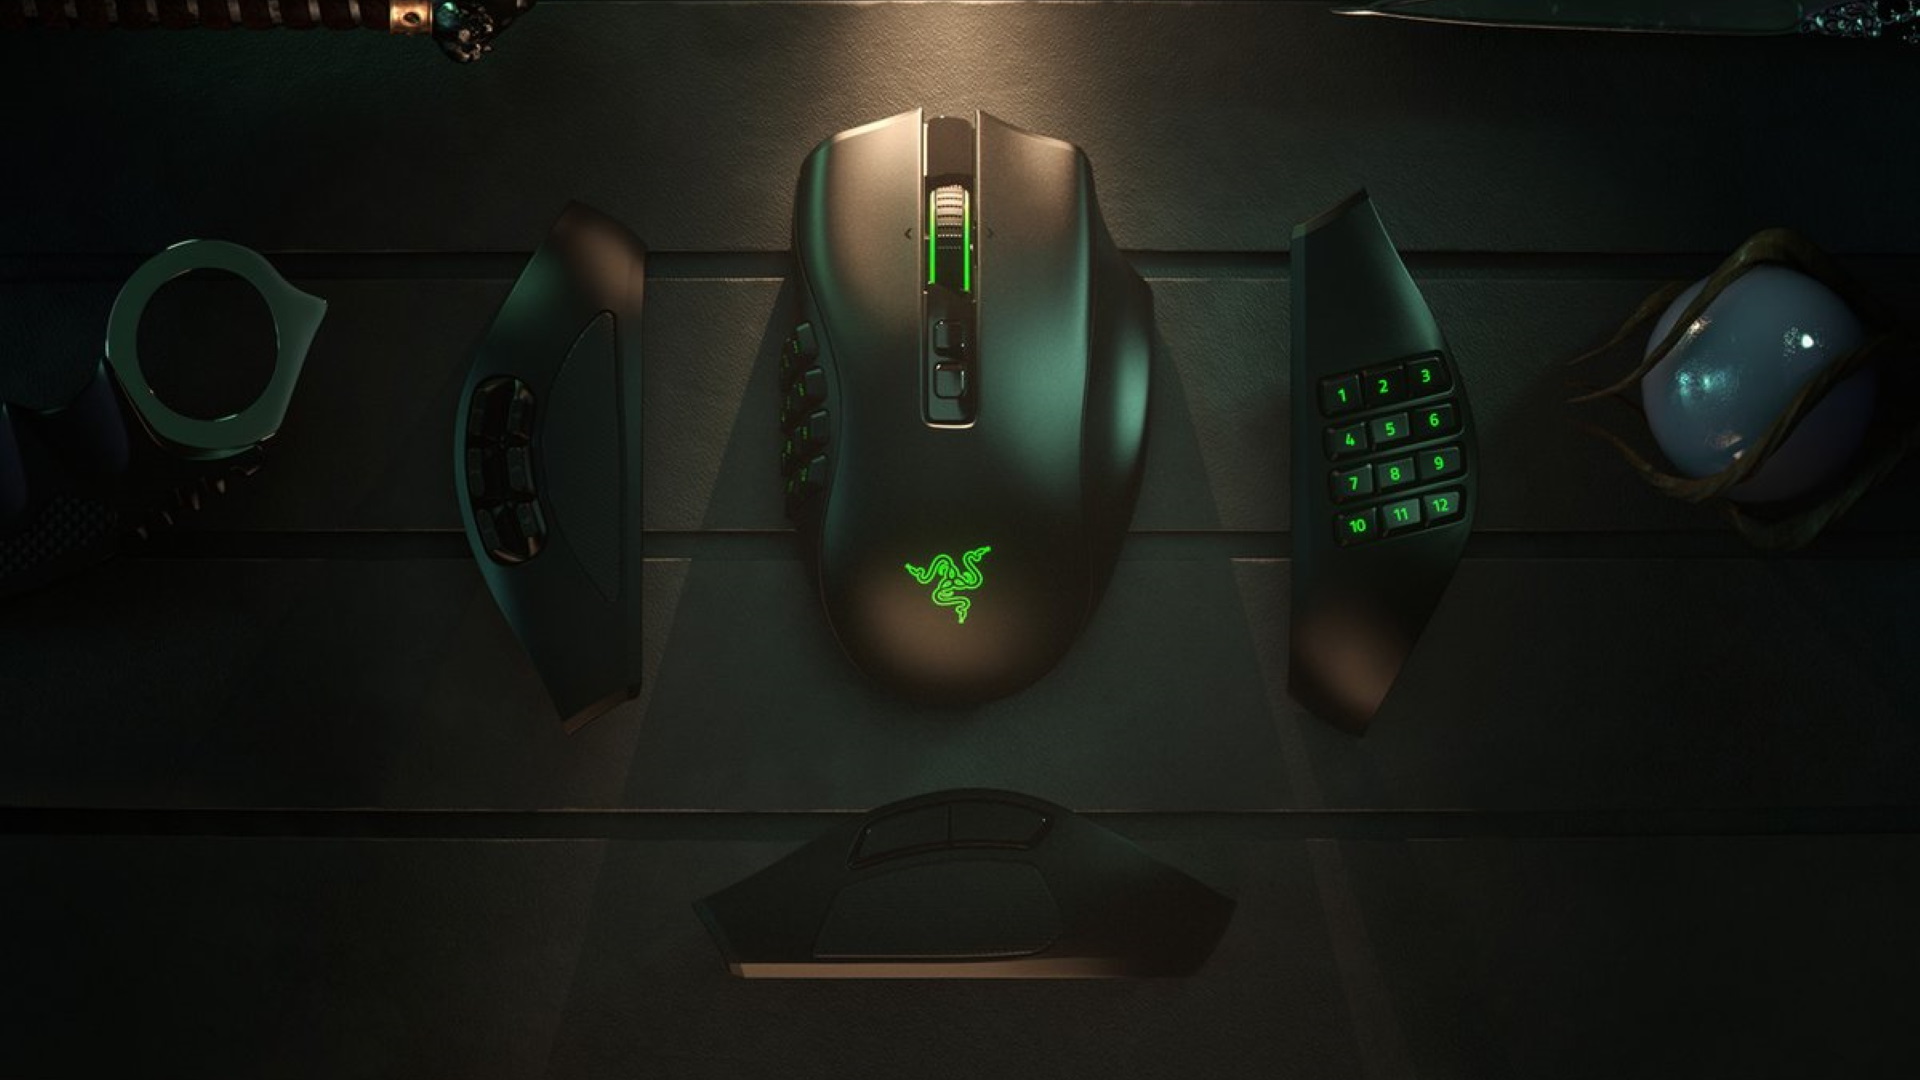 Razer Naga Pro Review A Reliable Multi-Purpose If You Can Afford It - BunnyGaming.com